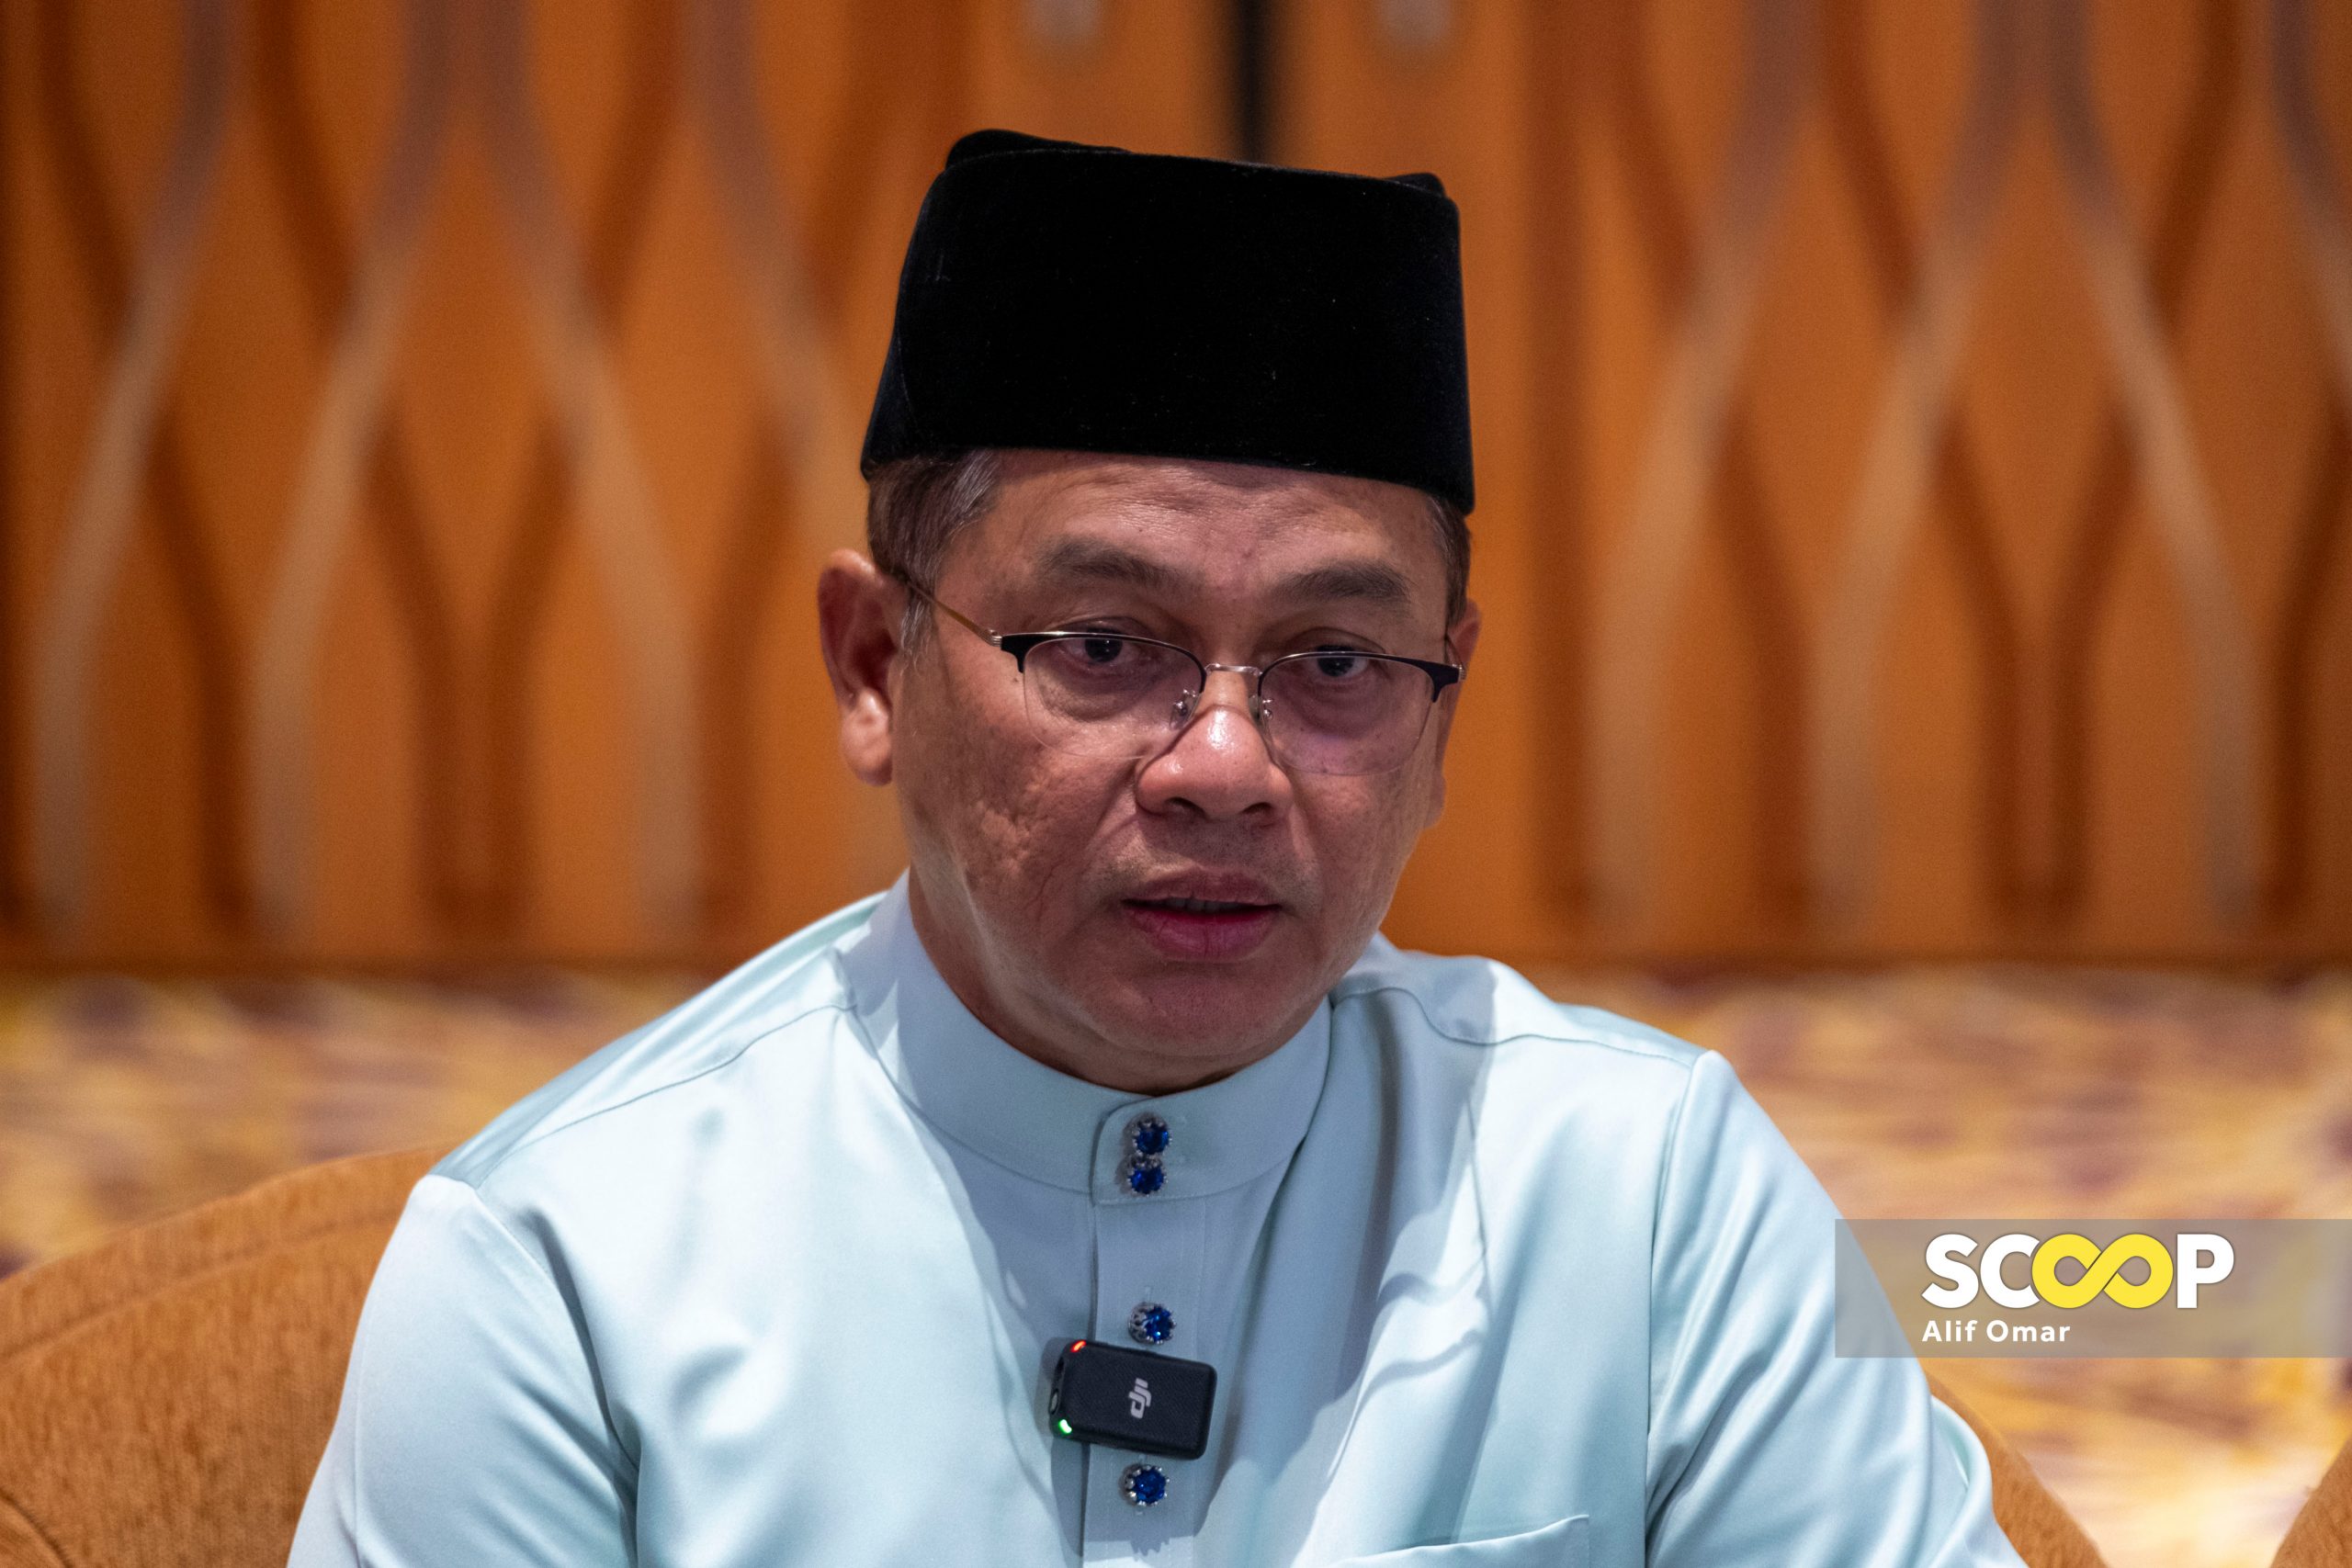 Proposal to include non-Muslims in special committee unfounded: Mohd Na’im